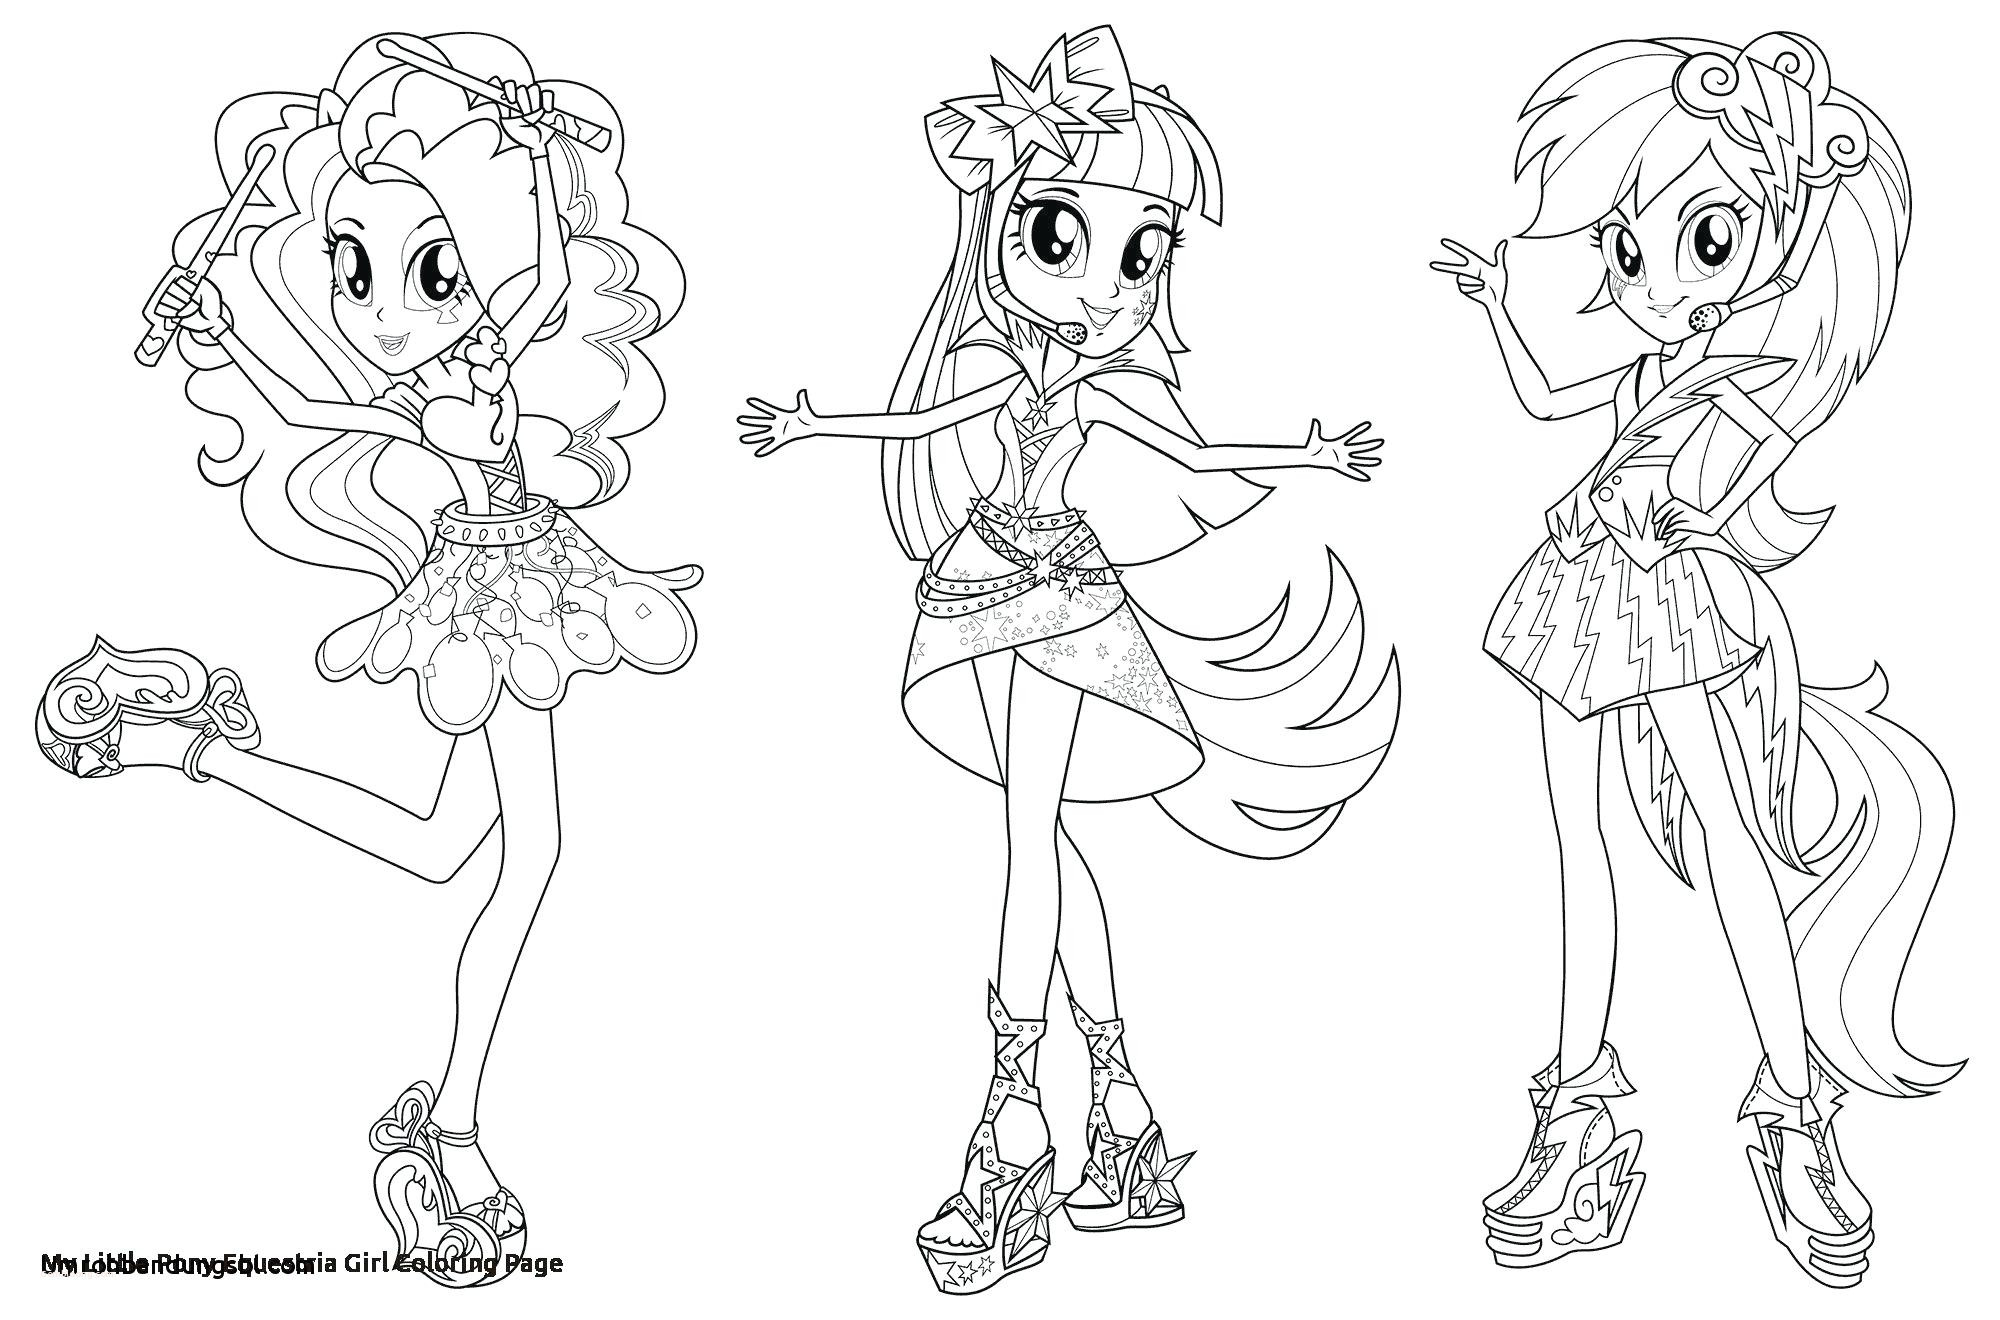 Download Coloring Pages My Little Pony Coloring Book Youtube Lovely My Little Pony Coloring Pages Equestria Girls My Little Pony Coloring Book Youtube Peak Coloring Home